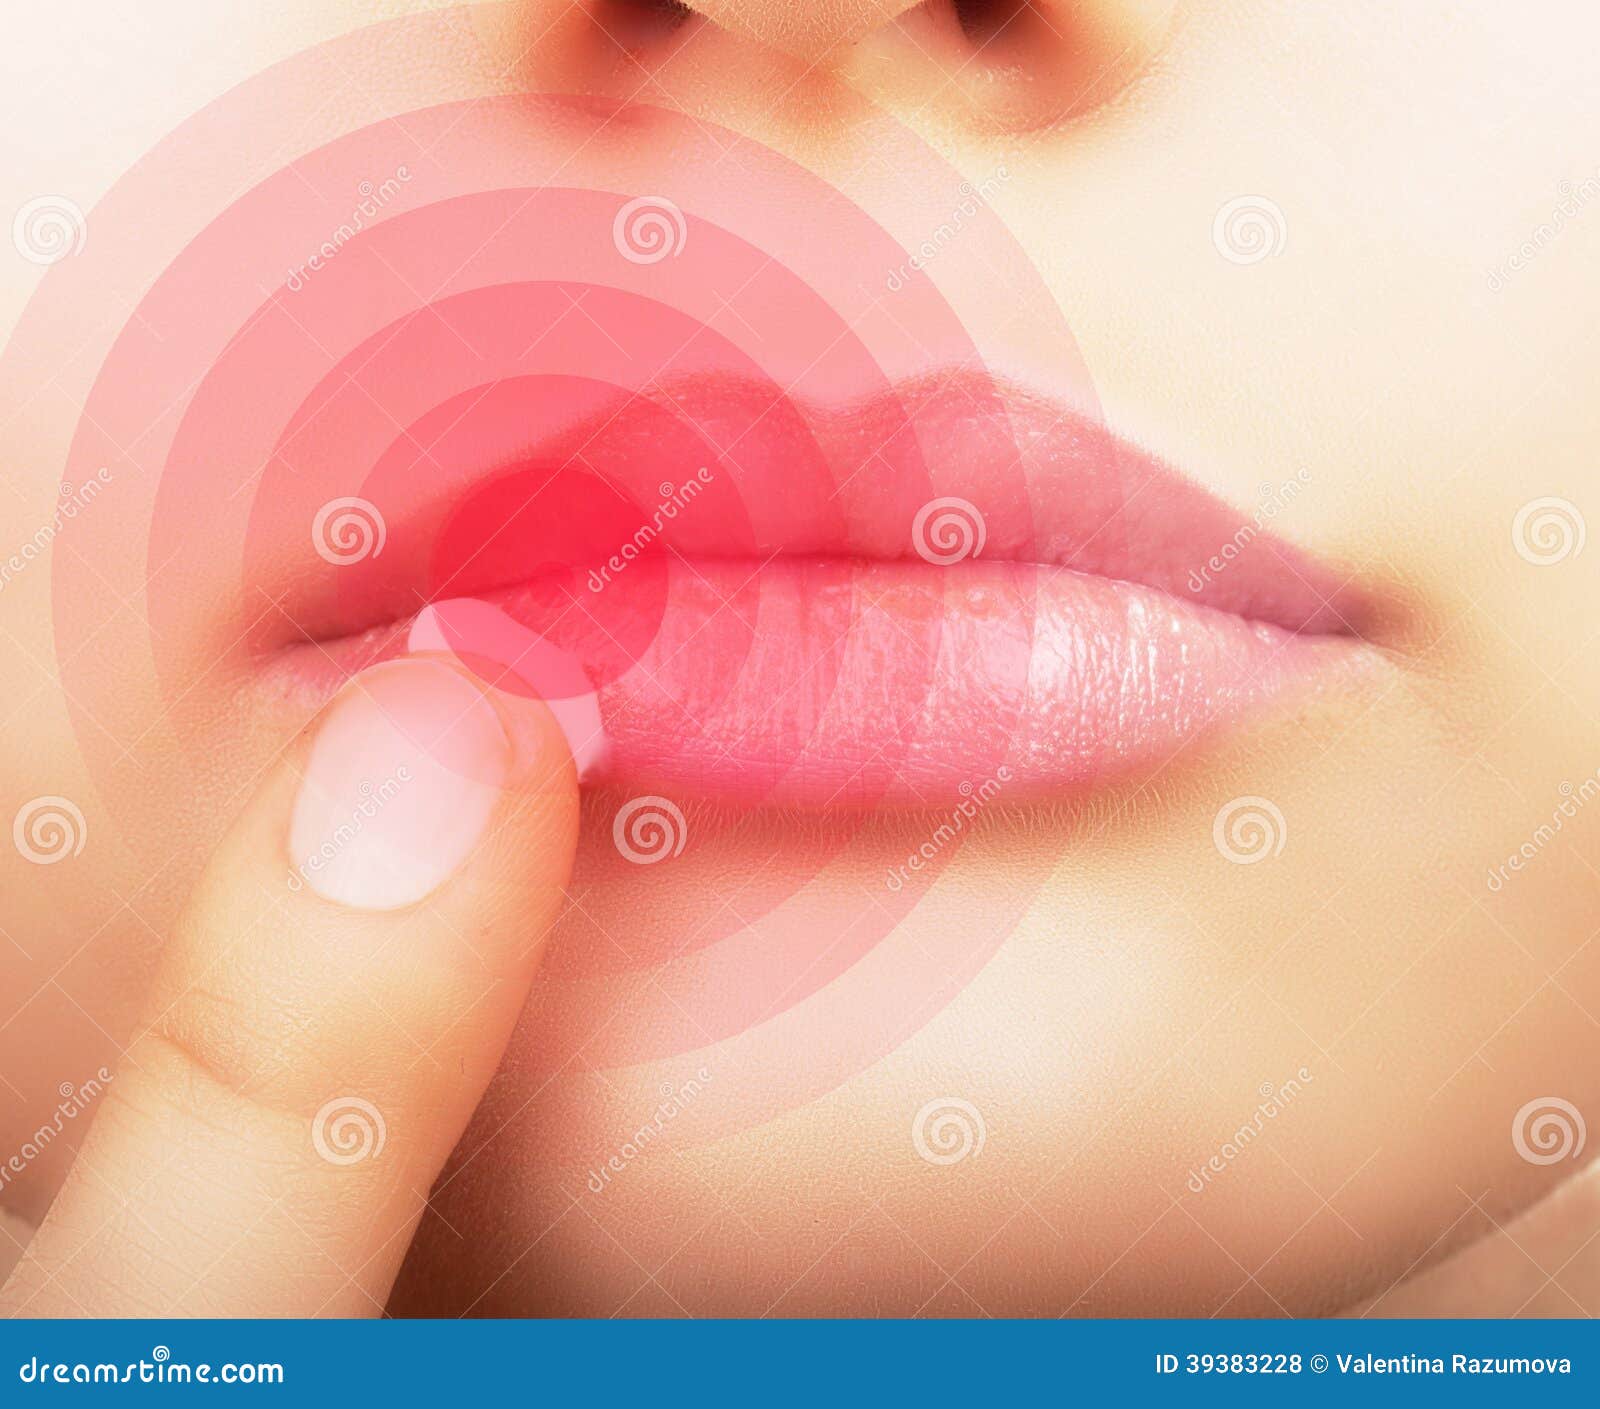 lips affected by herpes.